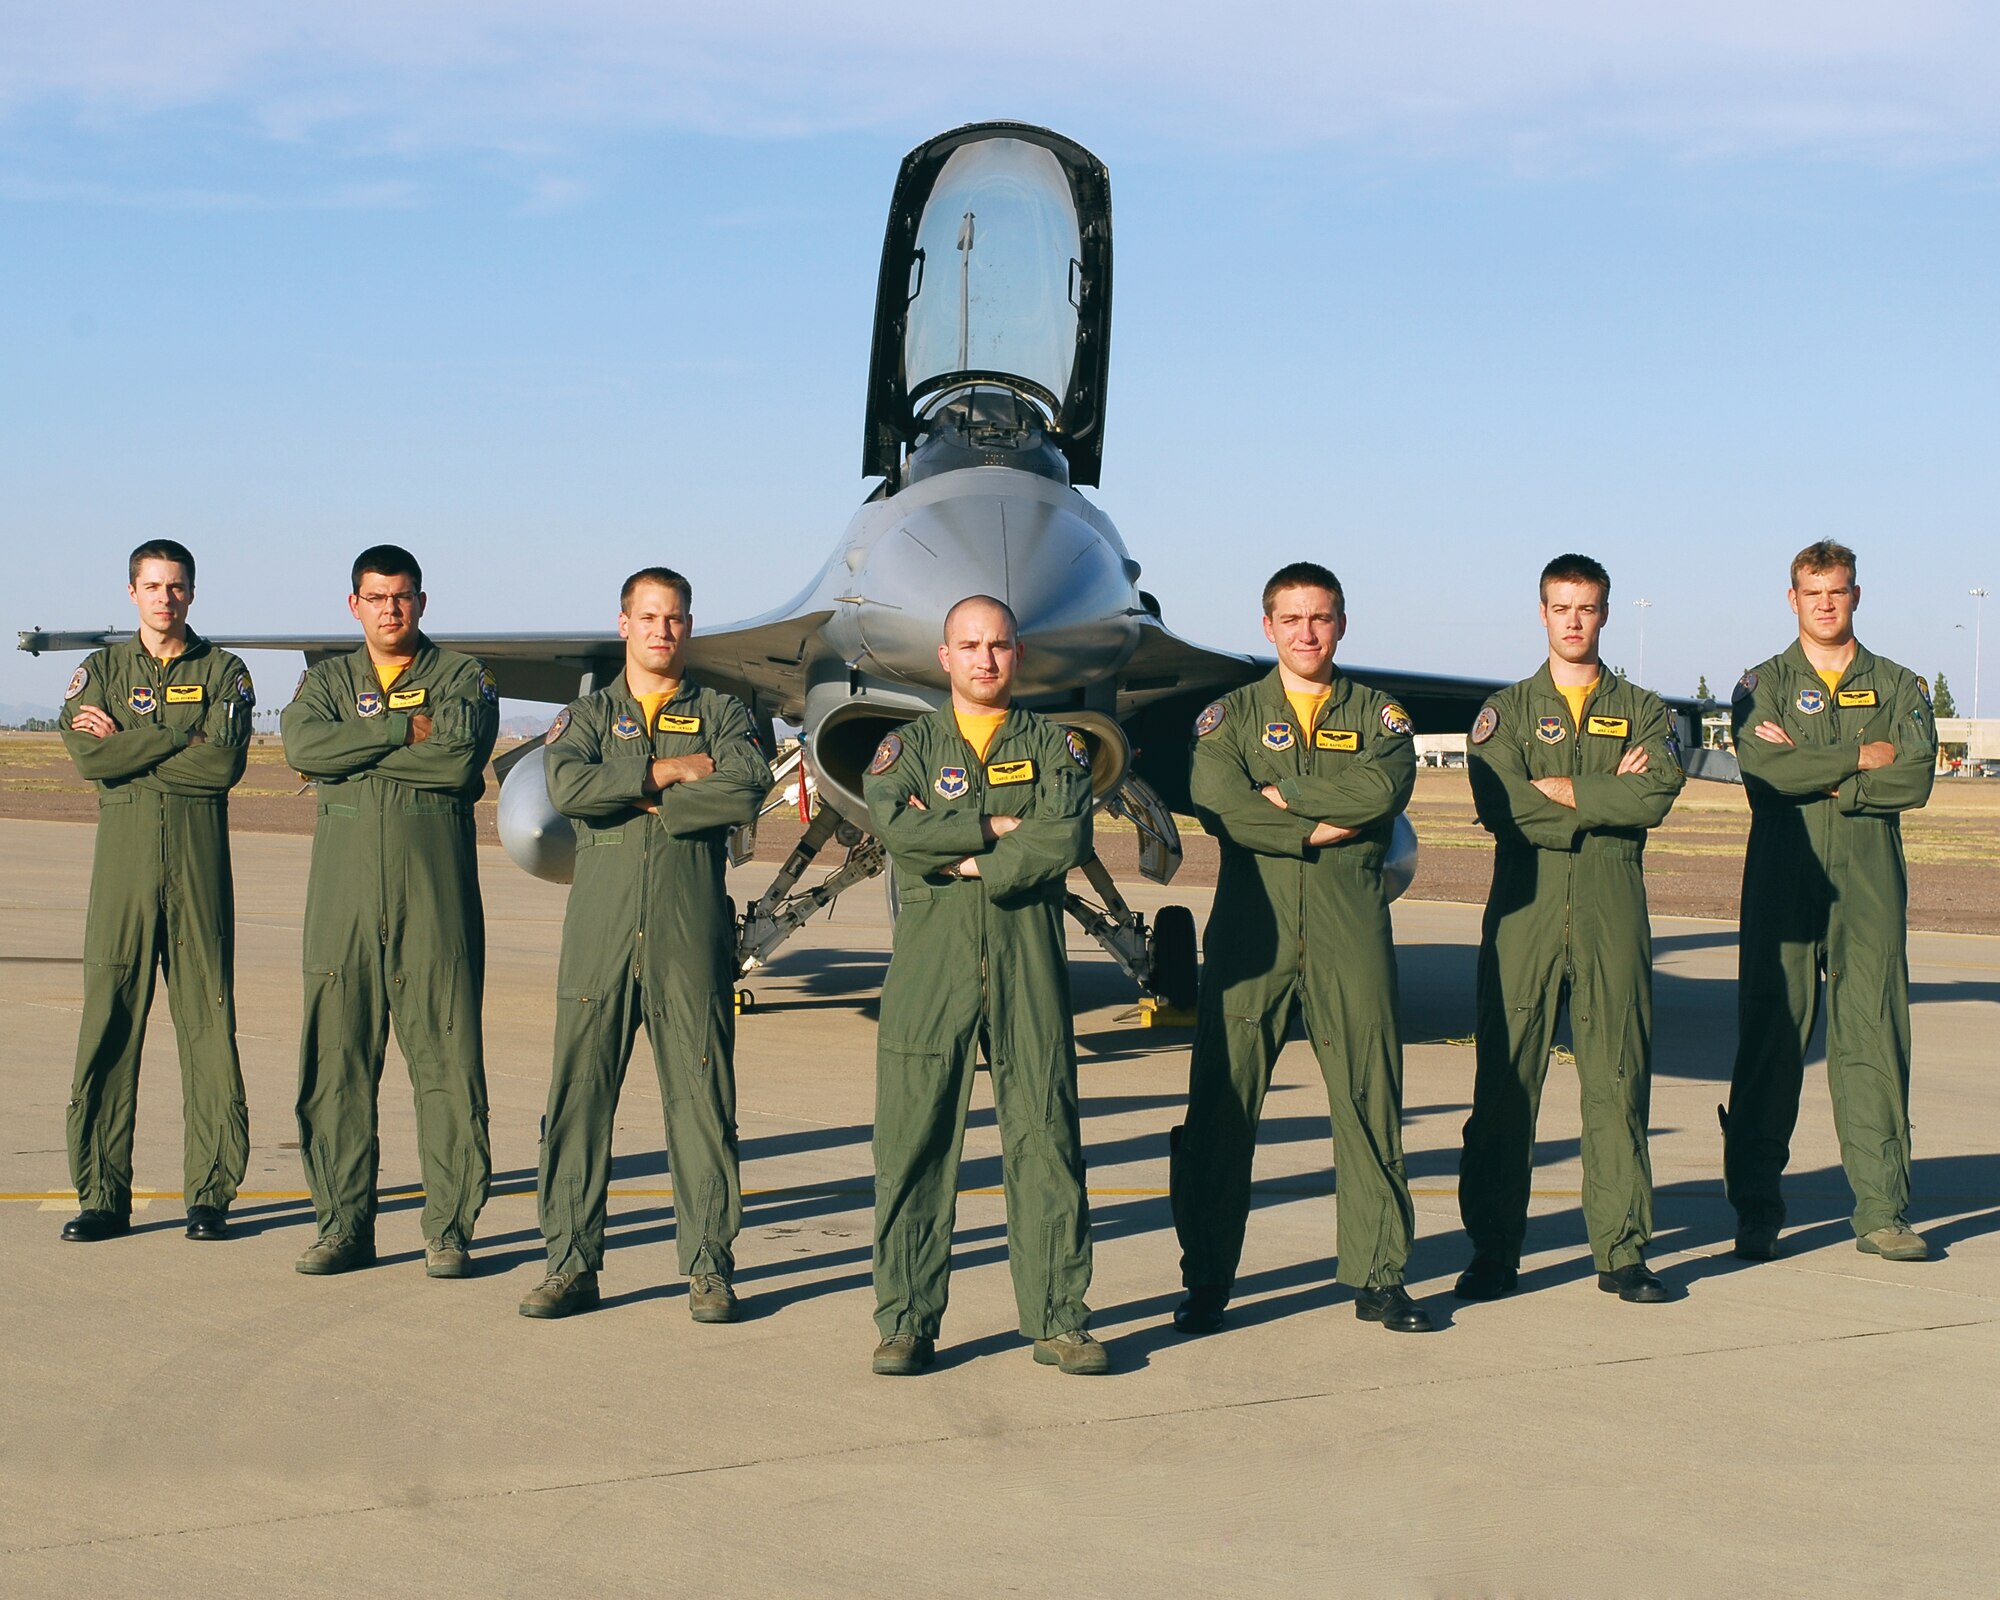 Seven officers of Class 09-DBC of the 61st Fighter Squadron graduated Dec. 4, 2009. (From left):  Capts. Mark Browning, Joe Bob Howard, Steve Jensen and Christopher Jensen; 1st Lts. Michael Napolitano and Michael Cady and Capt. Scott Meyer. (U.S. Air Force photo by Senior Airman Tracie Forte)